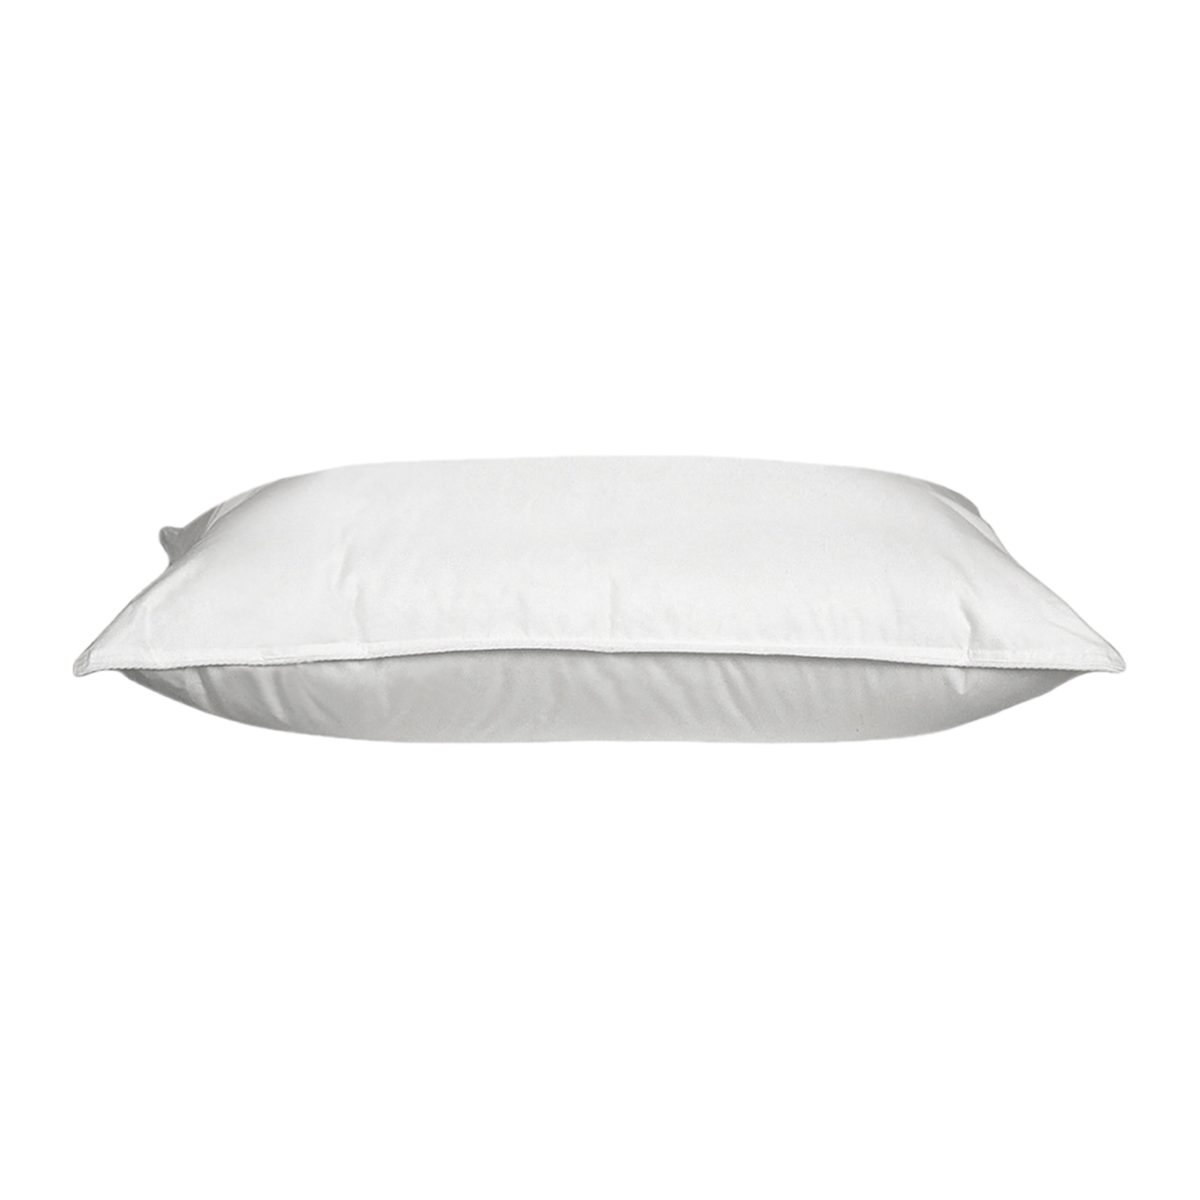 Clear Image of Downtown Company Sweet Dreams Pillow in White Color